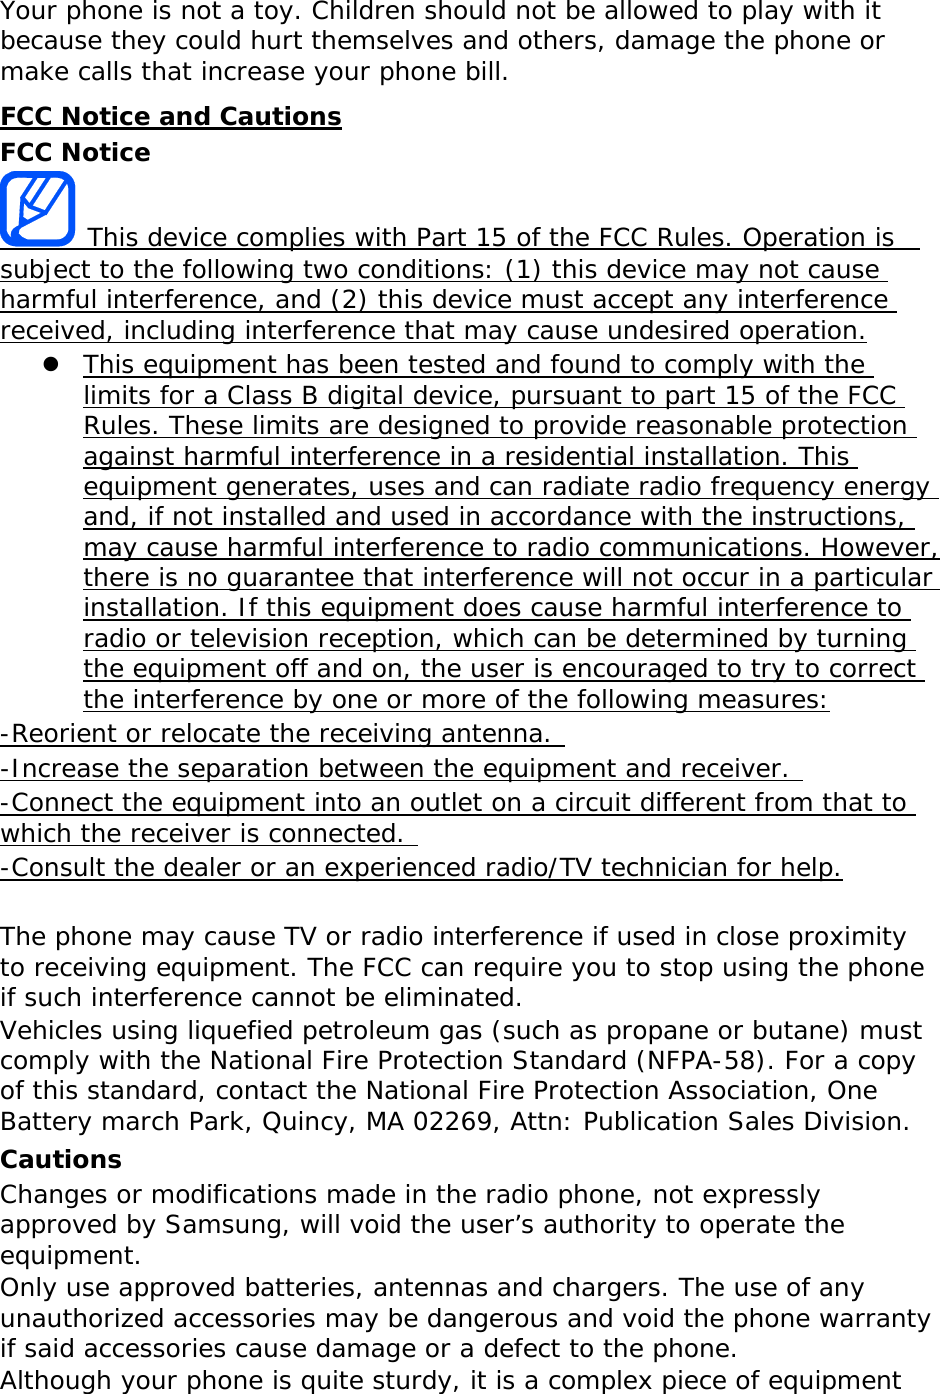 Your phone is not a toy. Children should not be allowed to play with it because they could hurt themselves and others, damage the phone or make calls that increase your phone bill. FCC Notice and Cautions FCC Notice  This device complies with Part 15 of the FCC Rules. Operation is  subject to the following two conditions: (1) this device may not cause harmful interference, and (2) this device must accept any interference received, including interference that may cause undesired operation. z This equipment has been tested and found to comply with the limits for a Class B digital device, pursuant to part 15 of the FCC Rules. These limits are designed to provide reasonable protection against harmful interference in a residential installation. This equipment generates, uses and can radiate radio frequency energy and, if not installed and used in accordance with the instructions, may cause harmful interference to radio communications. However, there is no guarantee that interference will not occur in a particular installation. If this equipment does cause harmful interference to radio or television reception, which can be determined by turning the equipment off and on, the user is encouraged to try to correct the interference by one or more of the following measures: -Reorient or relocate the receiving antenna.  -Increase the separation between the equipment and receiver.  -Connect the equipment into an outlet on a circuit different from that to which the receiver is connected.  -Consult the dealer or an experienced radio/TV technician for help.  The phone may cause TV or radio interference if used in close proximity to receiving equipment. The FCC can require you to stop using the phone if such interference cannot be eliminated. Vehicles using liquefied petroleum gas (such as propane or butane) must comply with the National Fire Protection Standard (NFPA-58). For a copy of this standard, contact the National Fire Protection Association, One Battery march Park, Quincy, MA 02269, Attn: Publication Sales Division. Cautions Changes or modifications made in the radio phone, not expressly approved by Samsung, will void the user’s authority to operate the equipment. Only use approved batteries, antennas and chargers. The use of any unauthorized accessories may be dangerous and void the phone warranty if said accessories cause damage or a defect to the phone. Although your phone is quite sturdy, it is a complex piece of equipment 